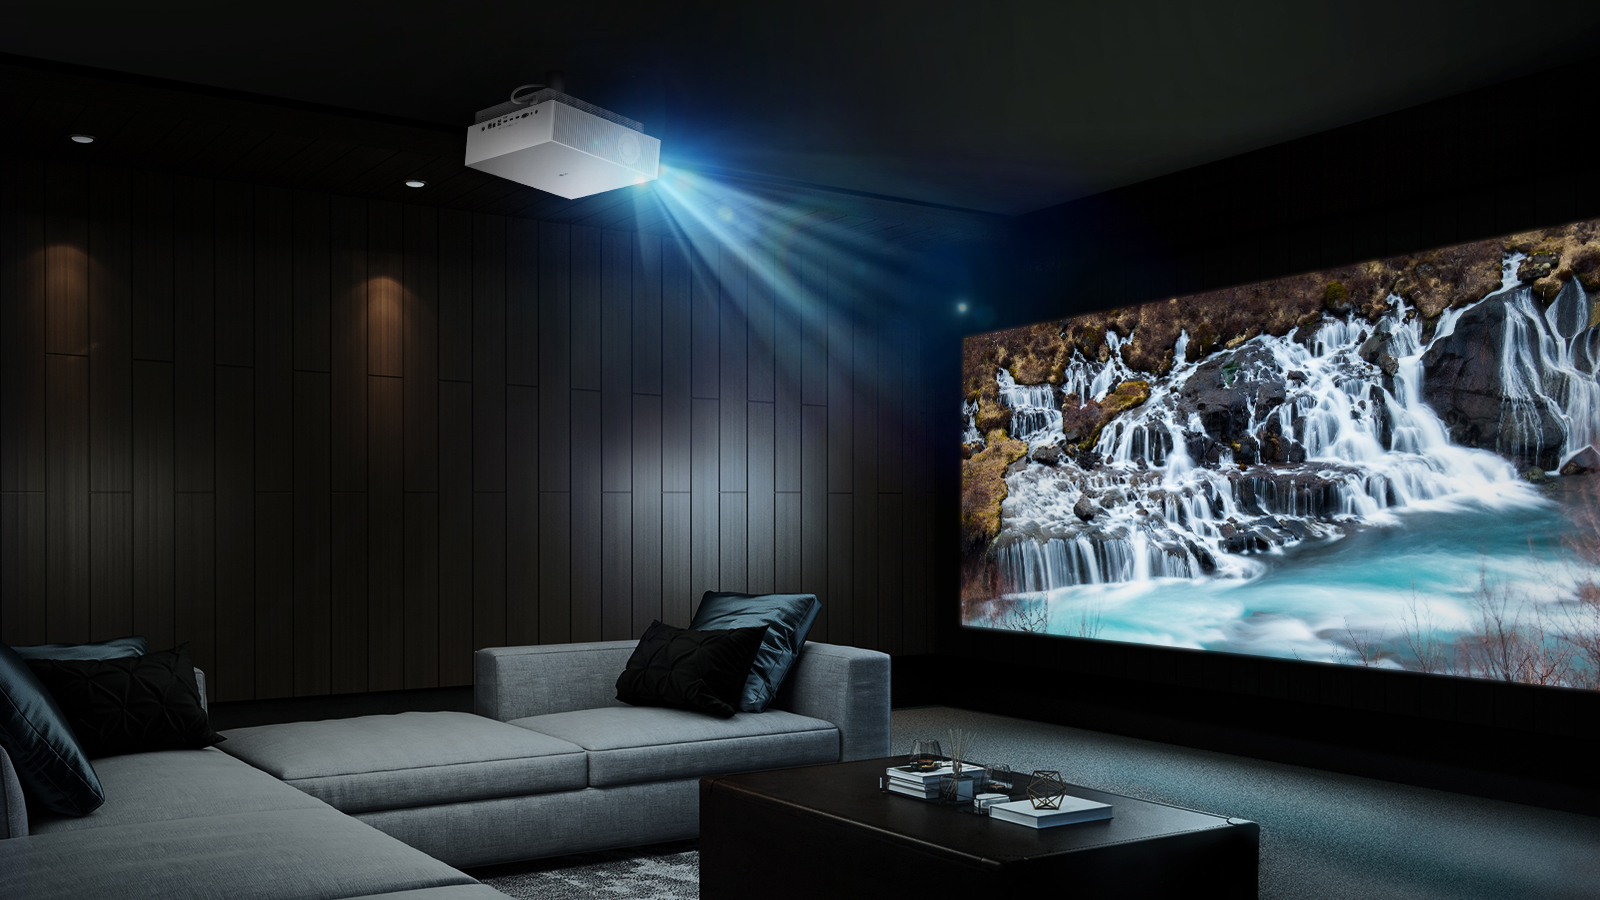 The new LG CineBeam 4K projector puts a 300inch movie screen in your